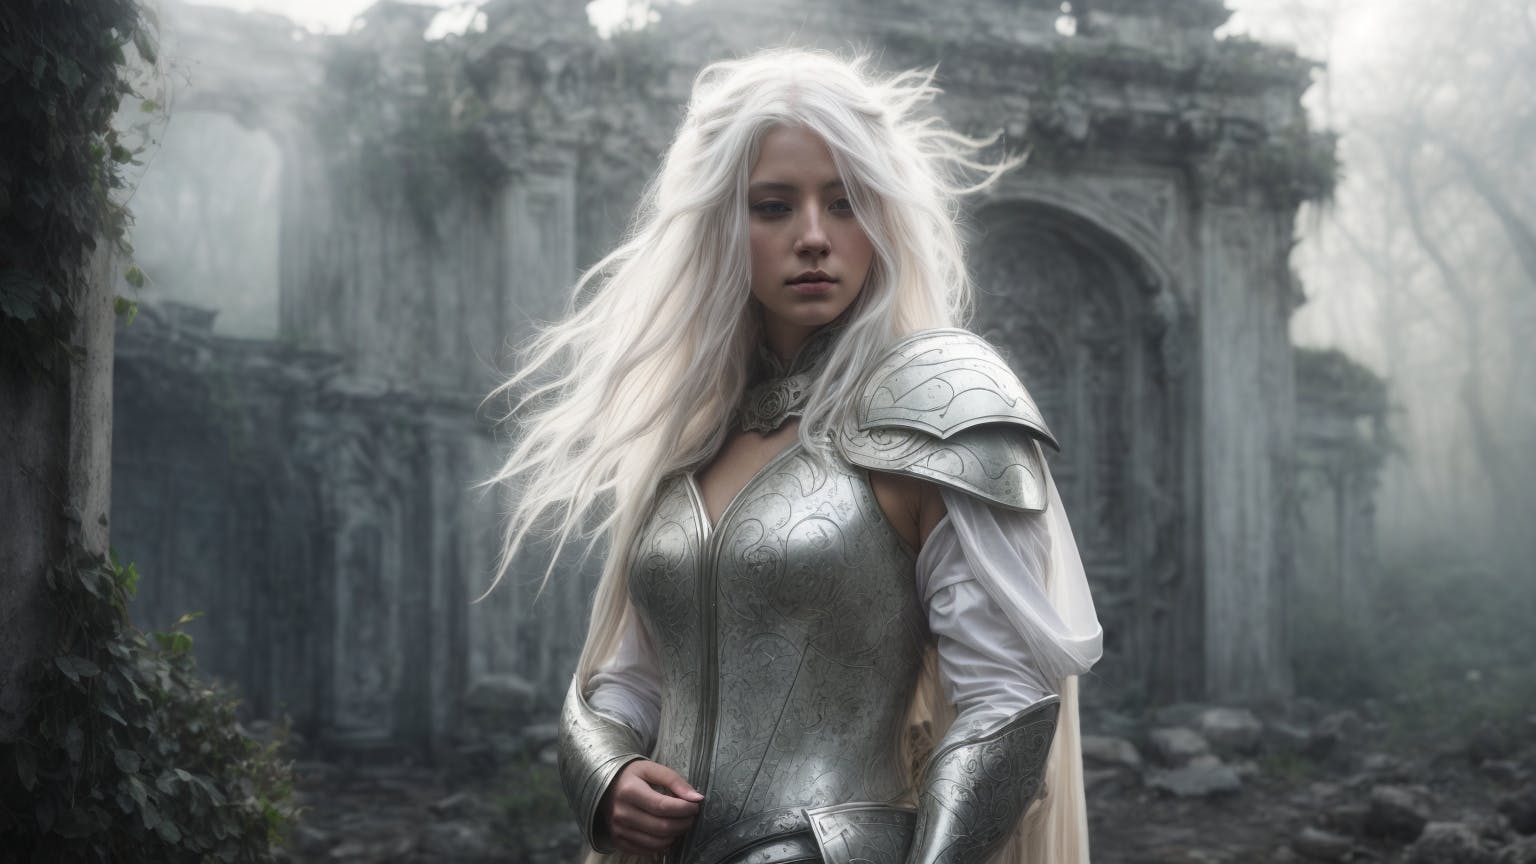 A woman in ornate silver armor with long white hair stands in a dreamy, ancient forest ruin.